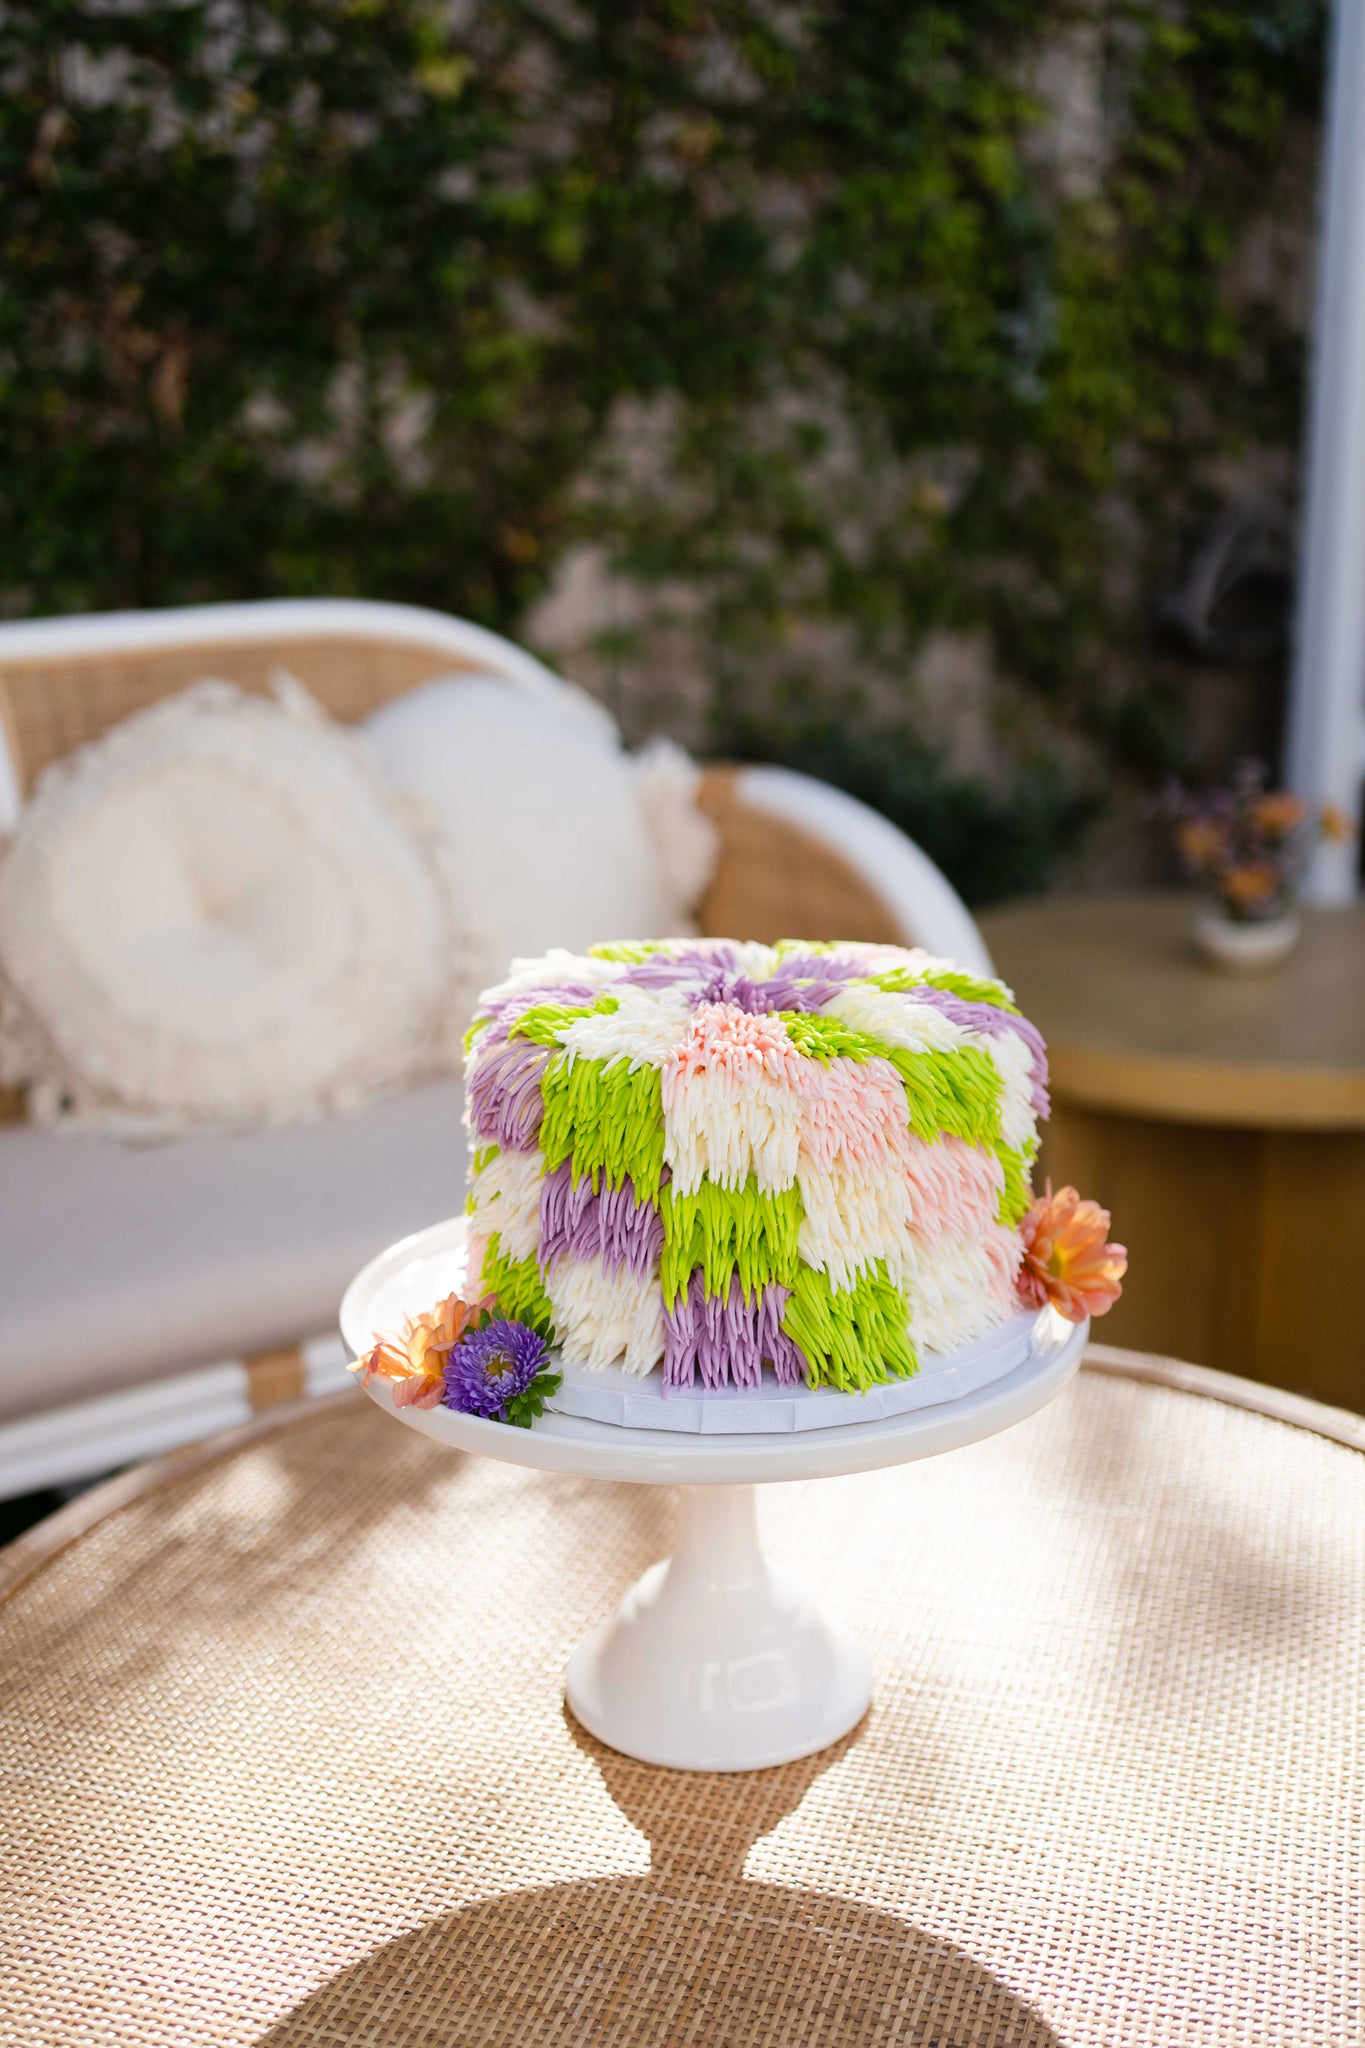 Purple, green, and white frill party cake